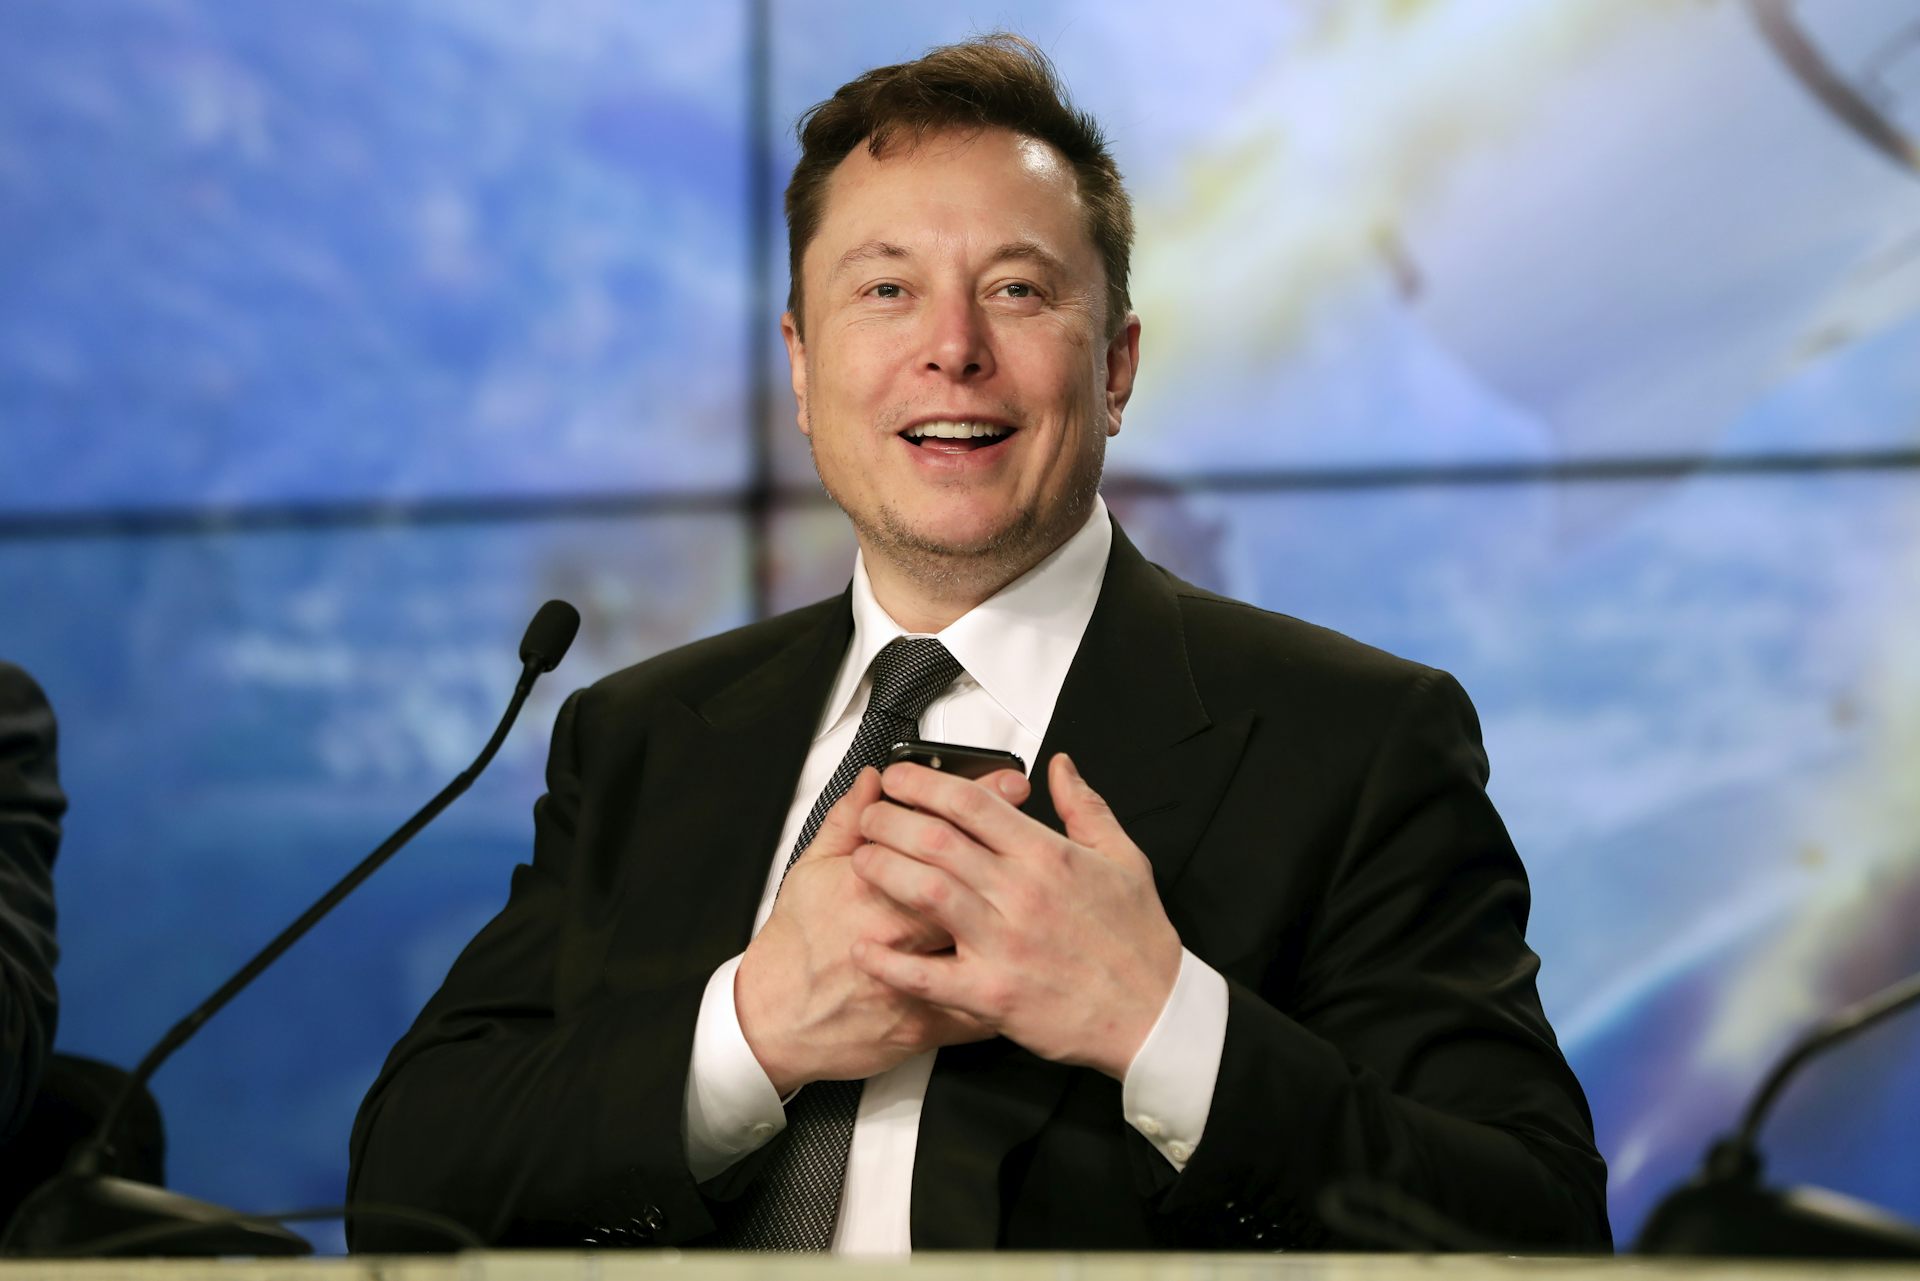 Elon Musk’s Plans for Twitter Could Make Its Misinformation Problems Worse